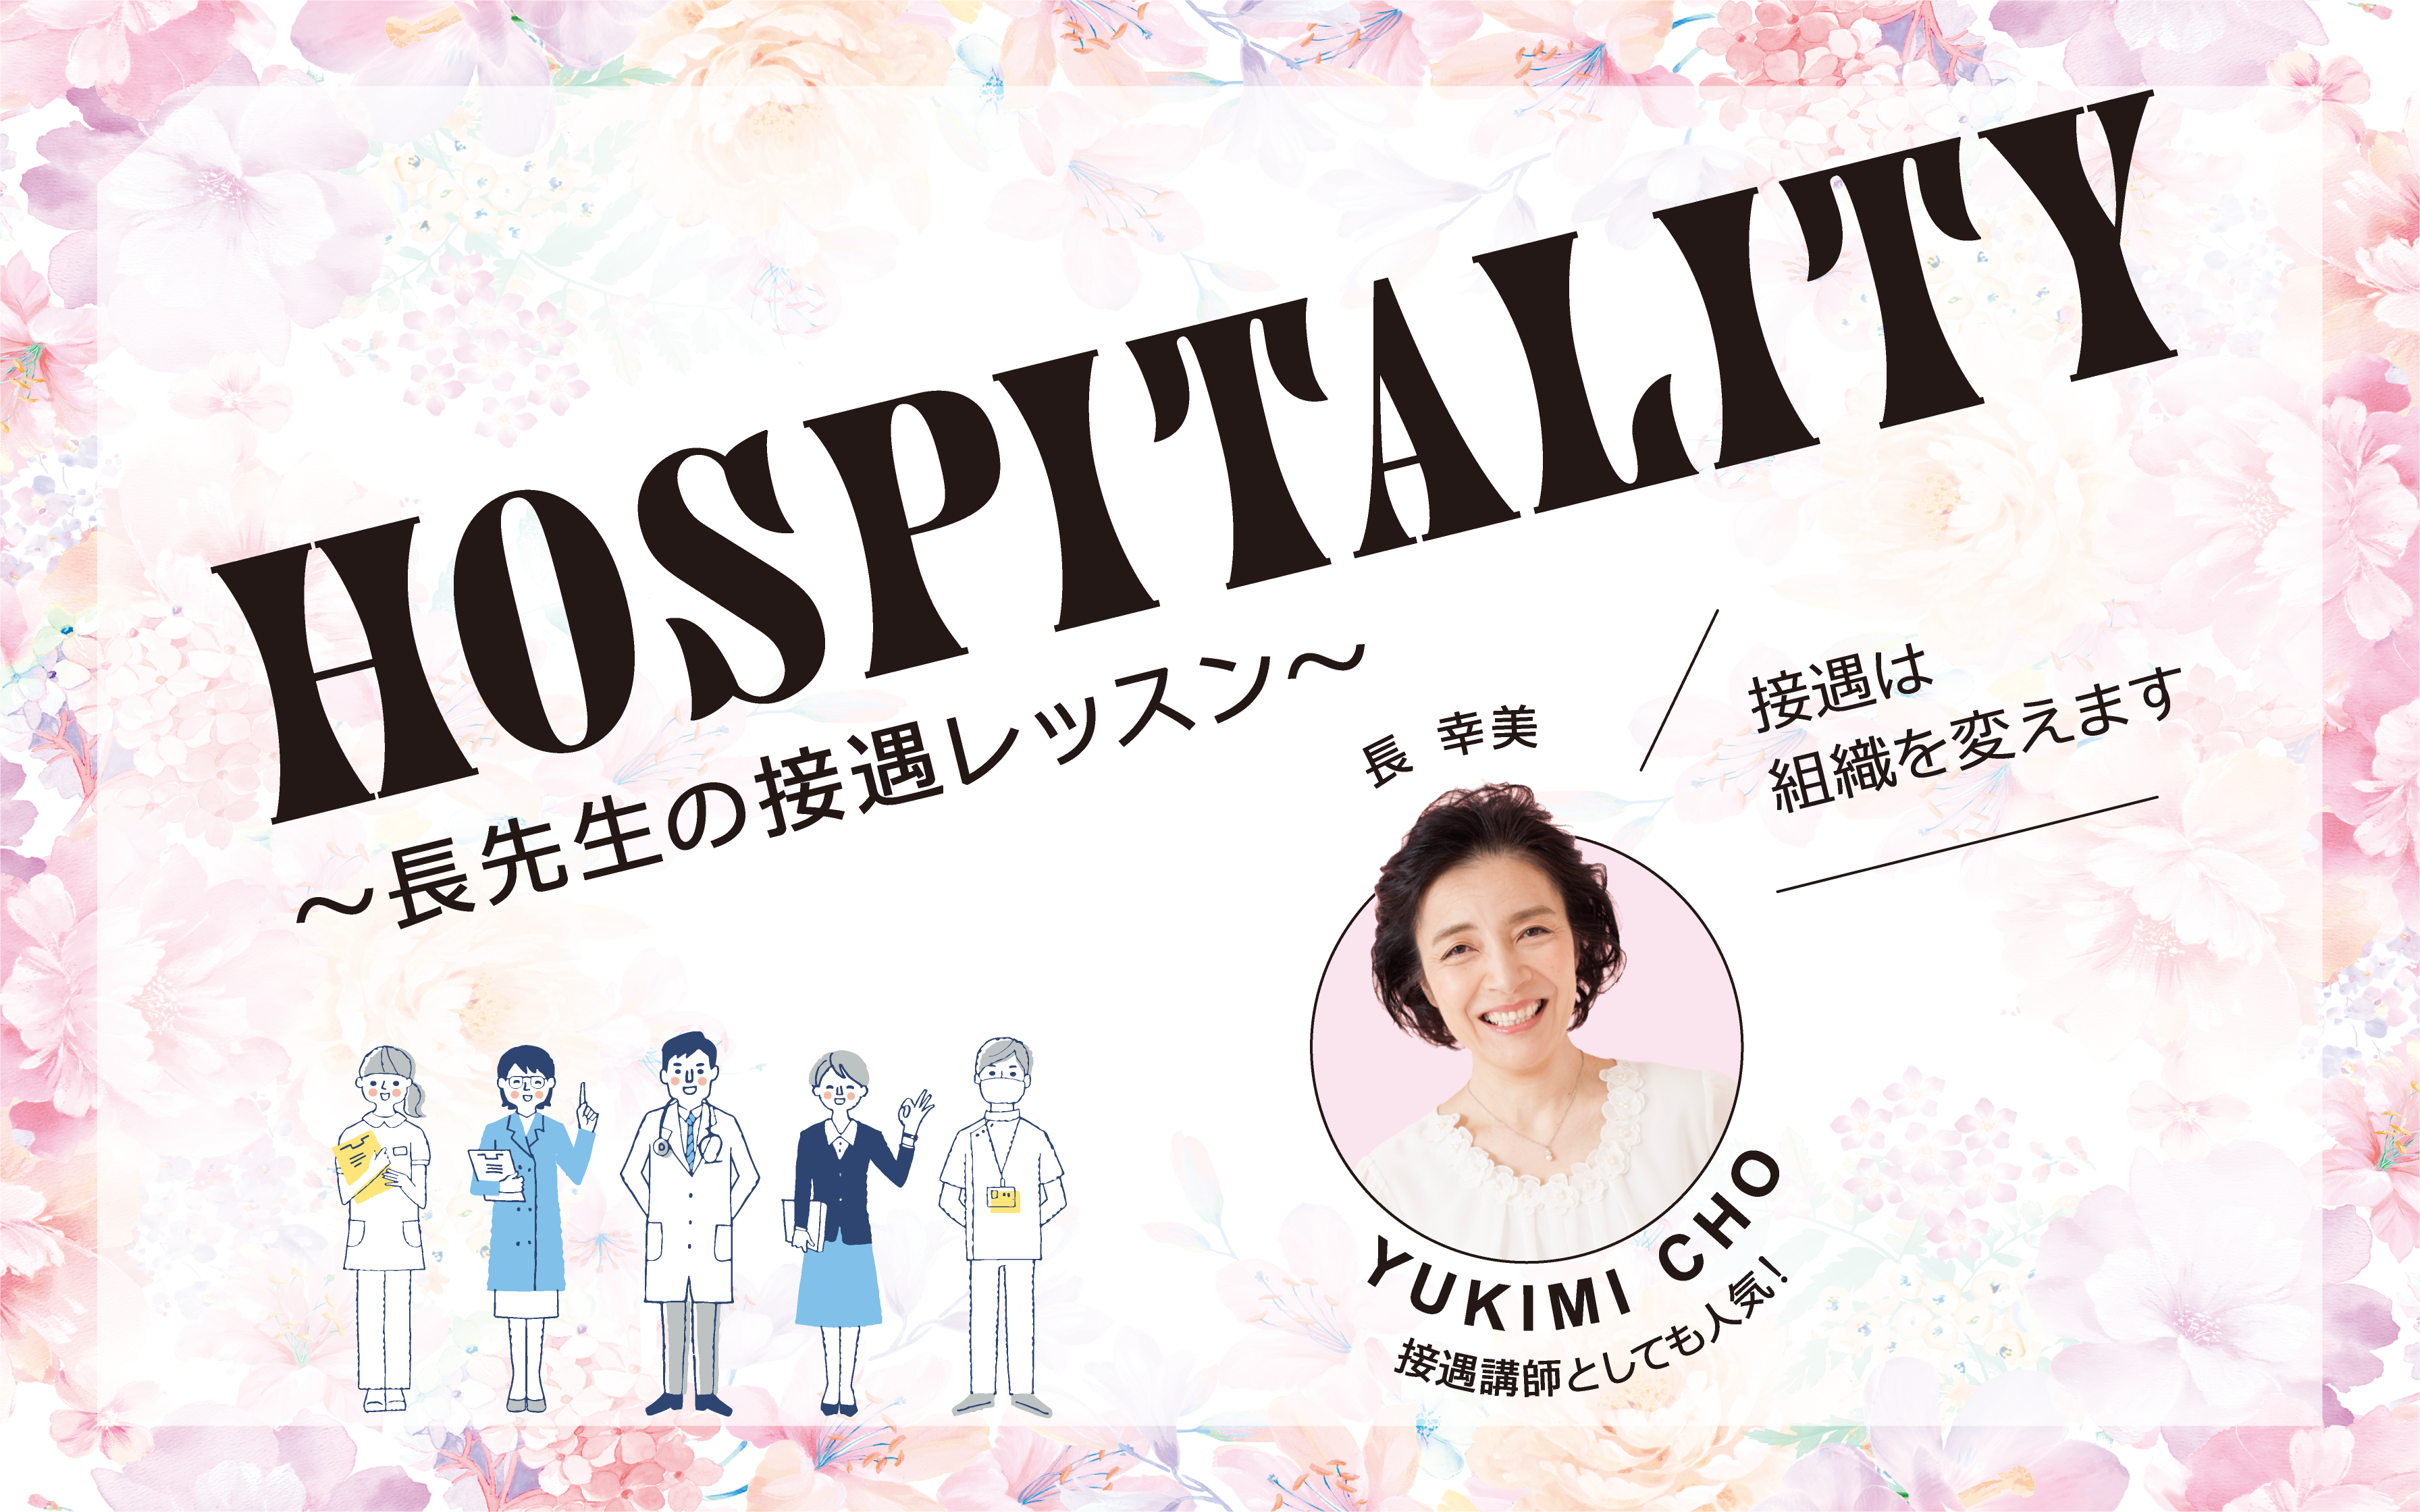 You are currently viewing HOSPITALITY 〜長先生の接遇レッスン〜 VOL.32　クレーム対応〜犯人捜しをしていませんか？〜